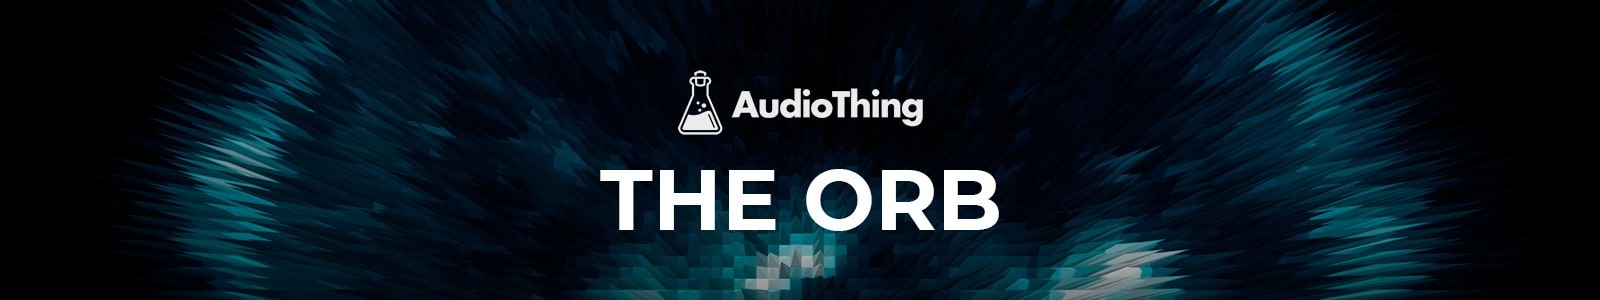 The Orb by AudioThing